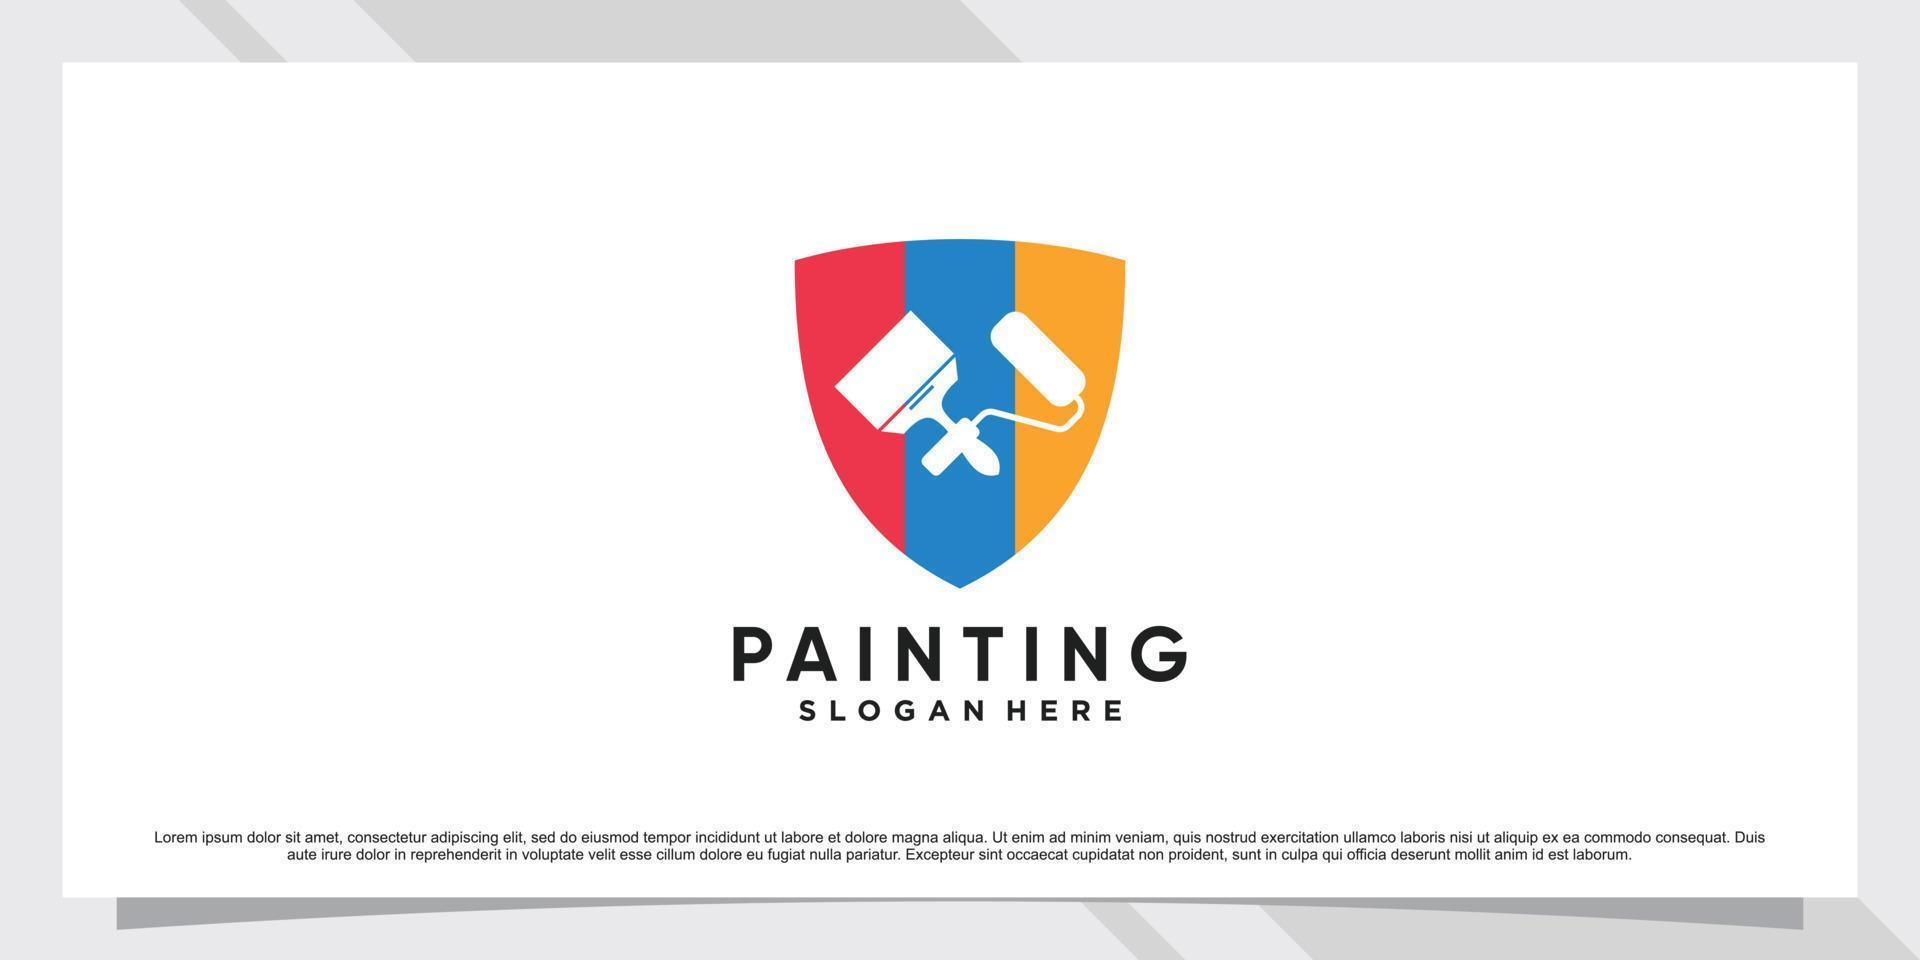 Painting logo design inspiration with roller, brush and creative element Premium Vector